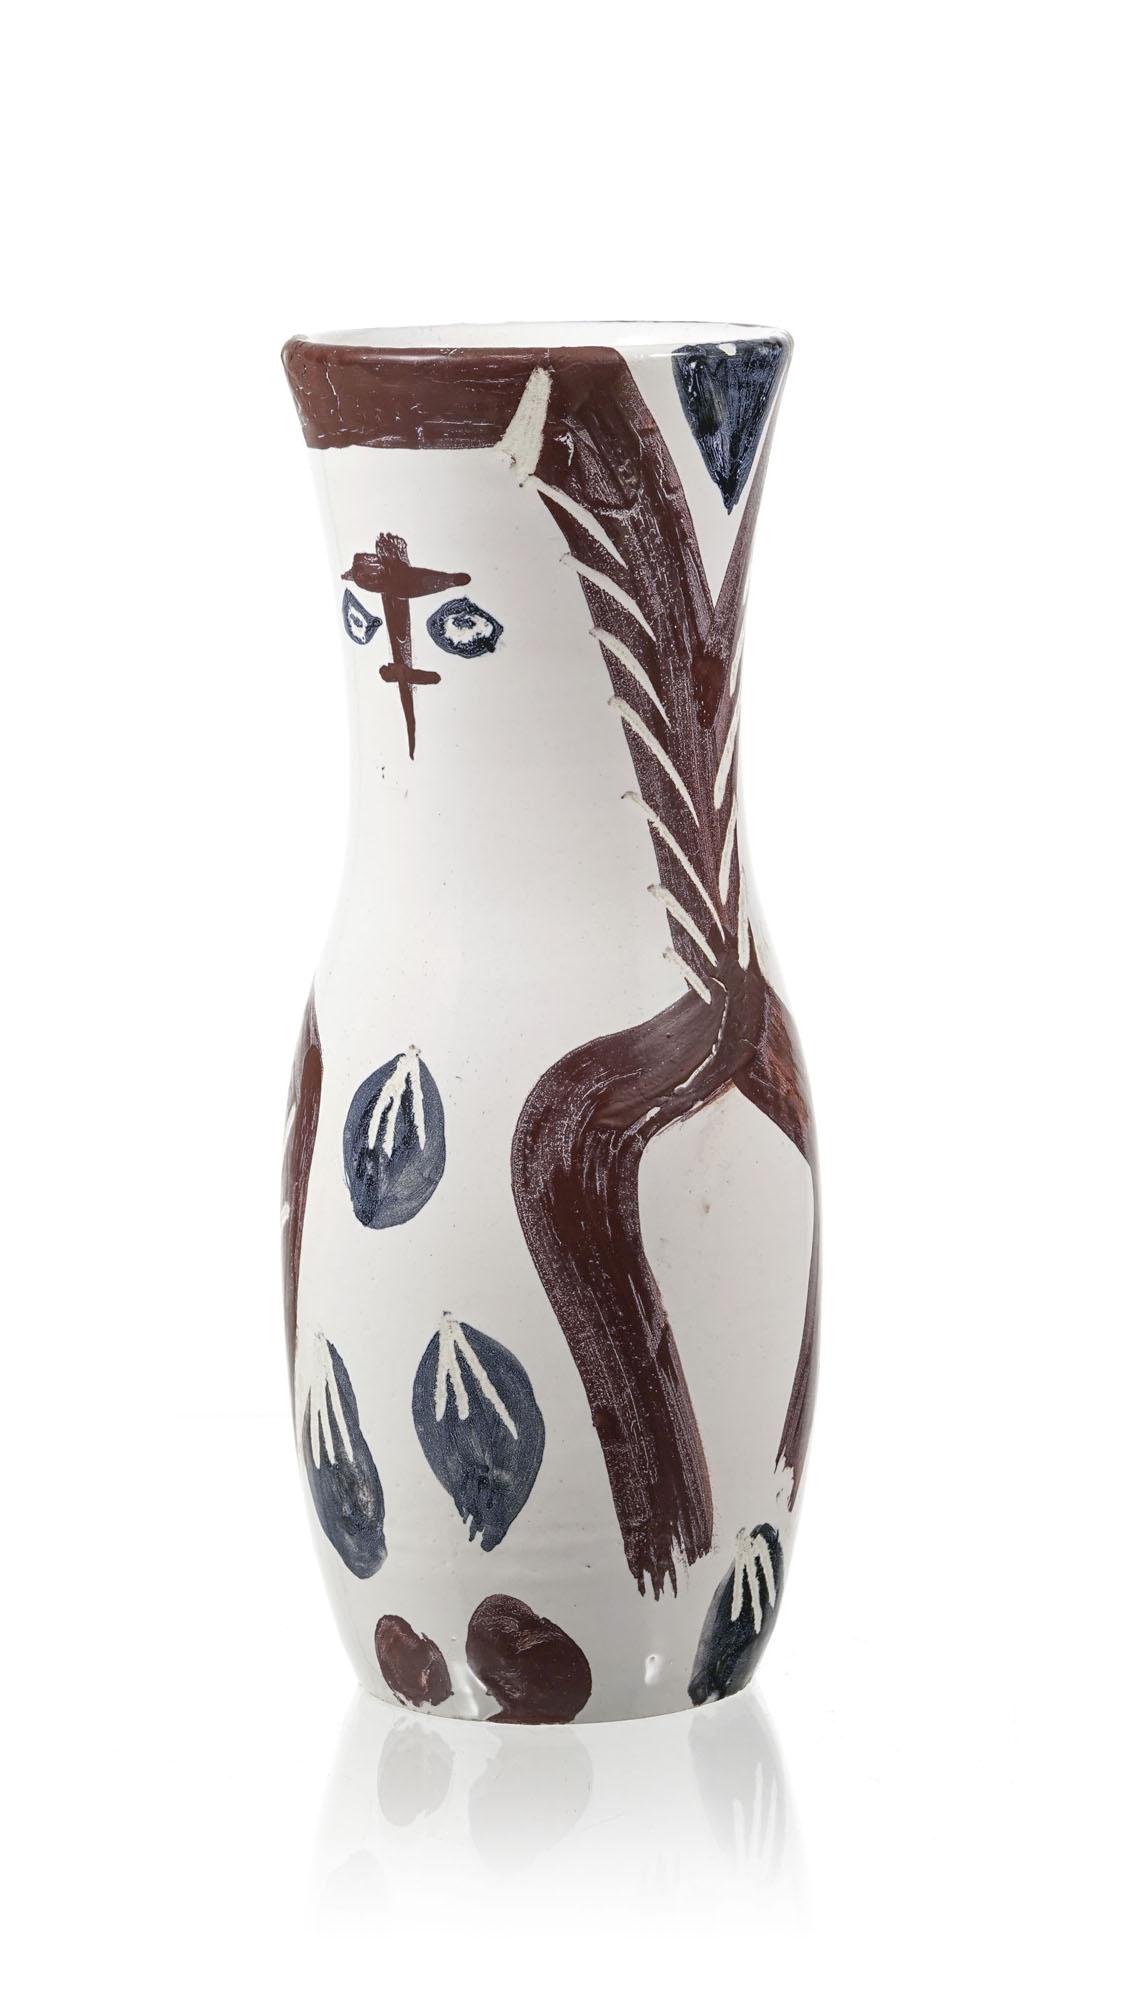 Young Wood Owl, Pablo Picasso, 1950's, Multiples, Design, Postwar, Pitcher For Sale 1